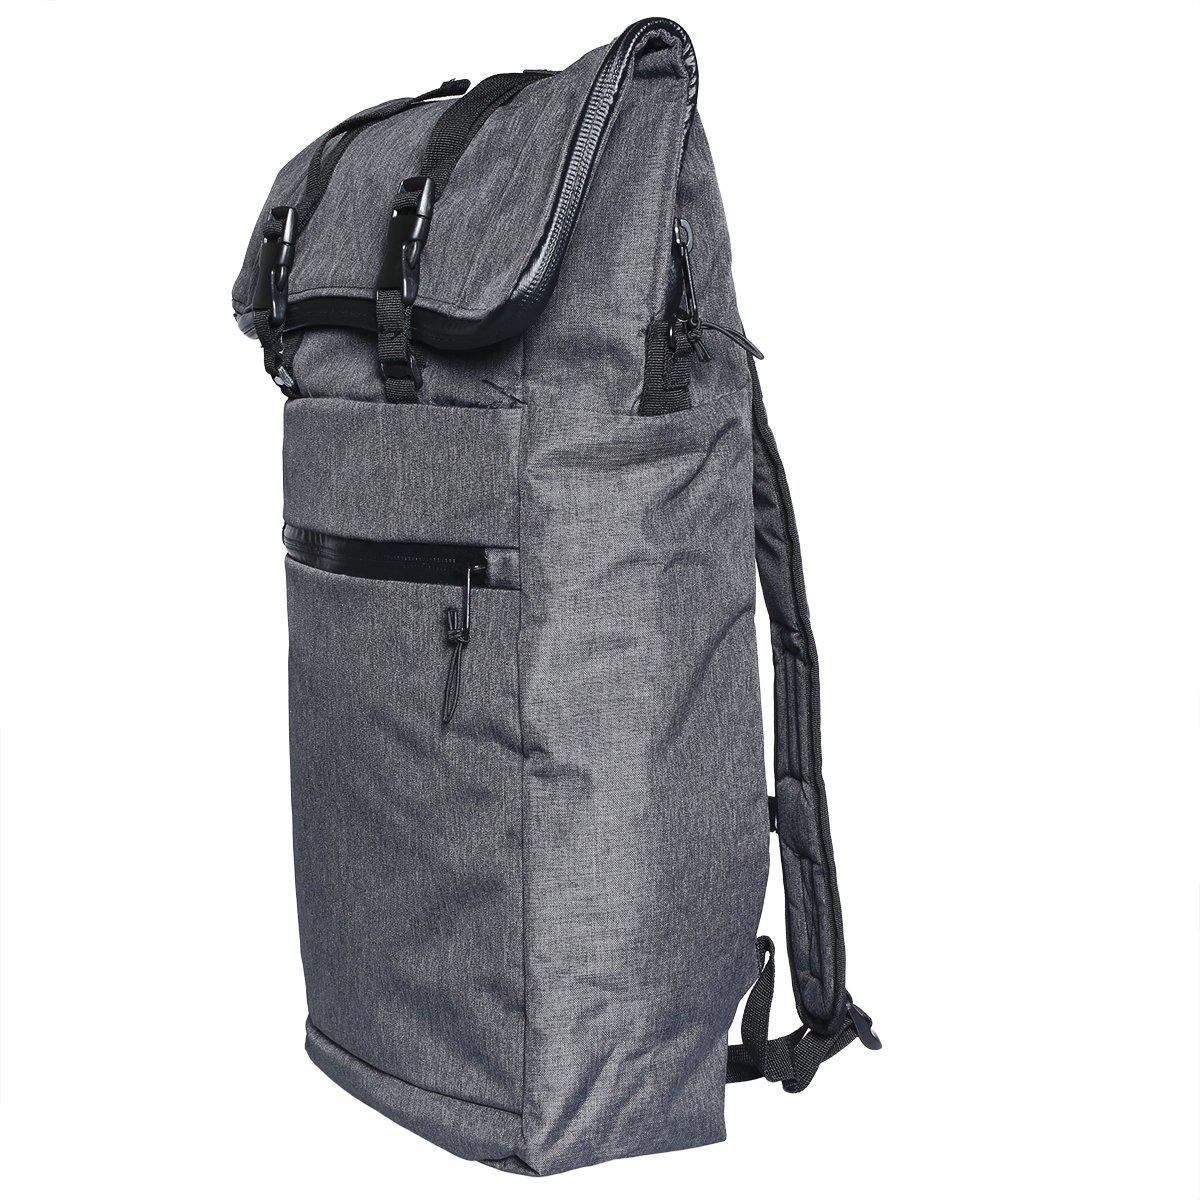 Smell Proof Backpack